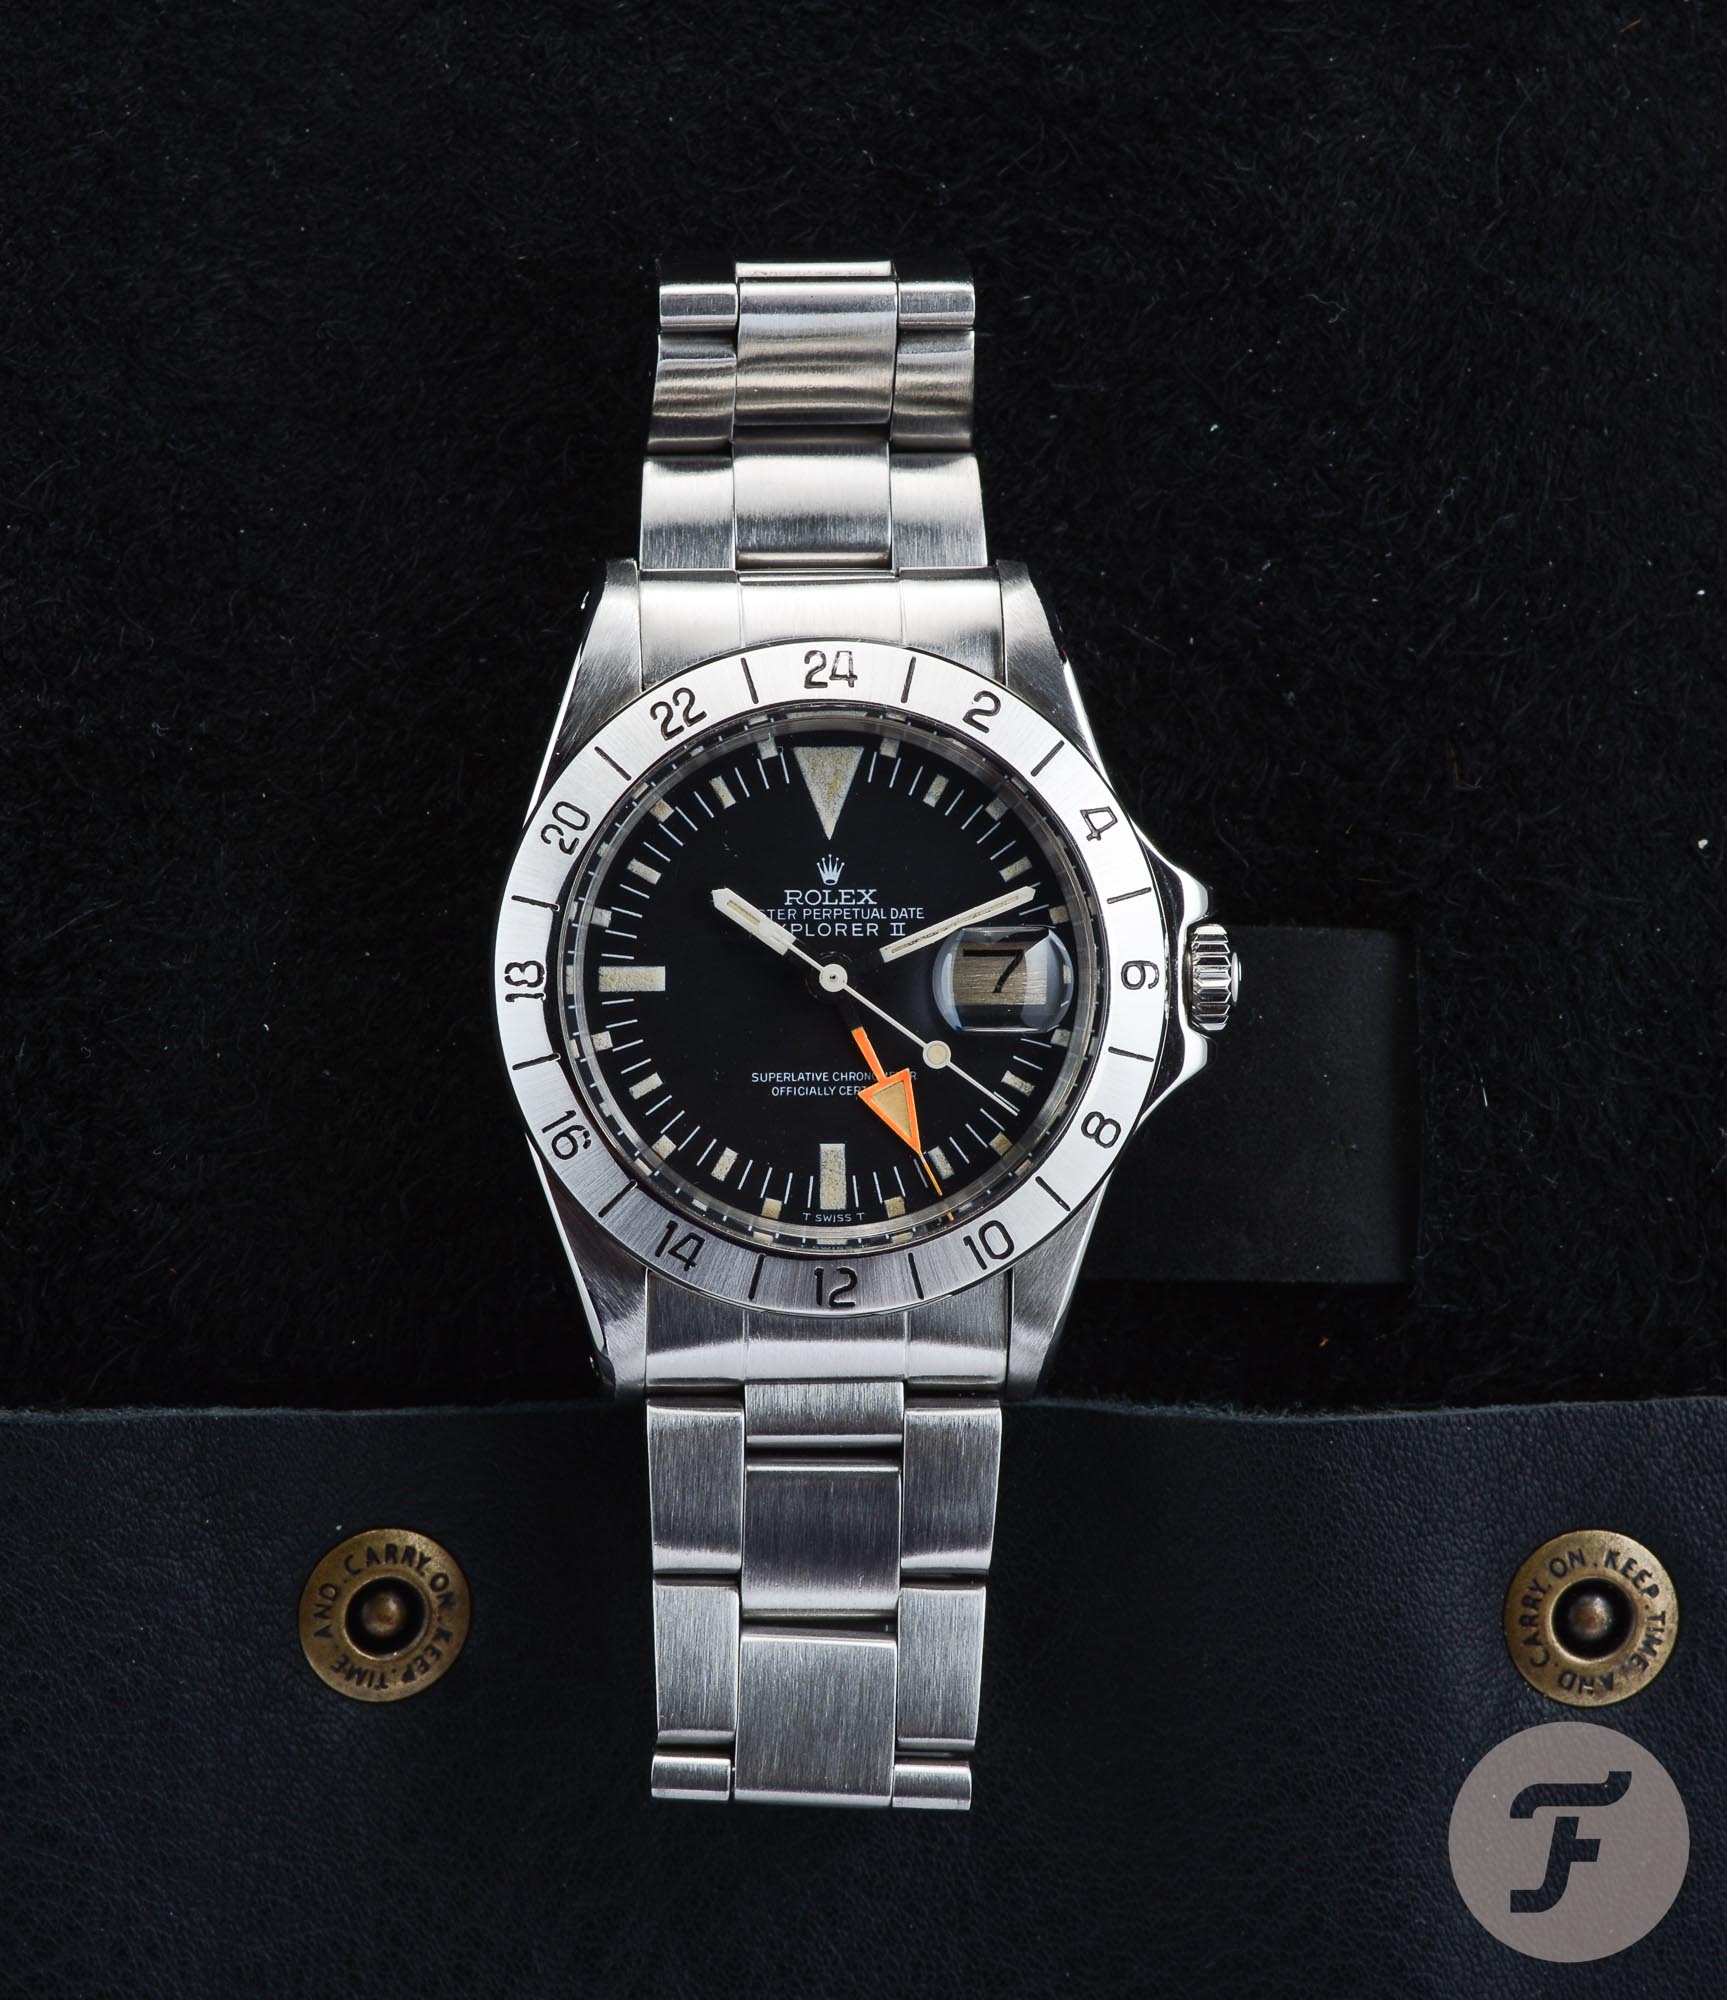 Hurtig intelligens Hong Kong The Ultimate Sports Rolex - The Explorer II Reference 1655